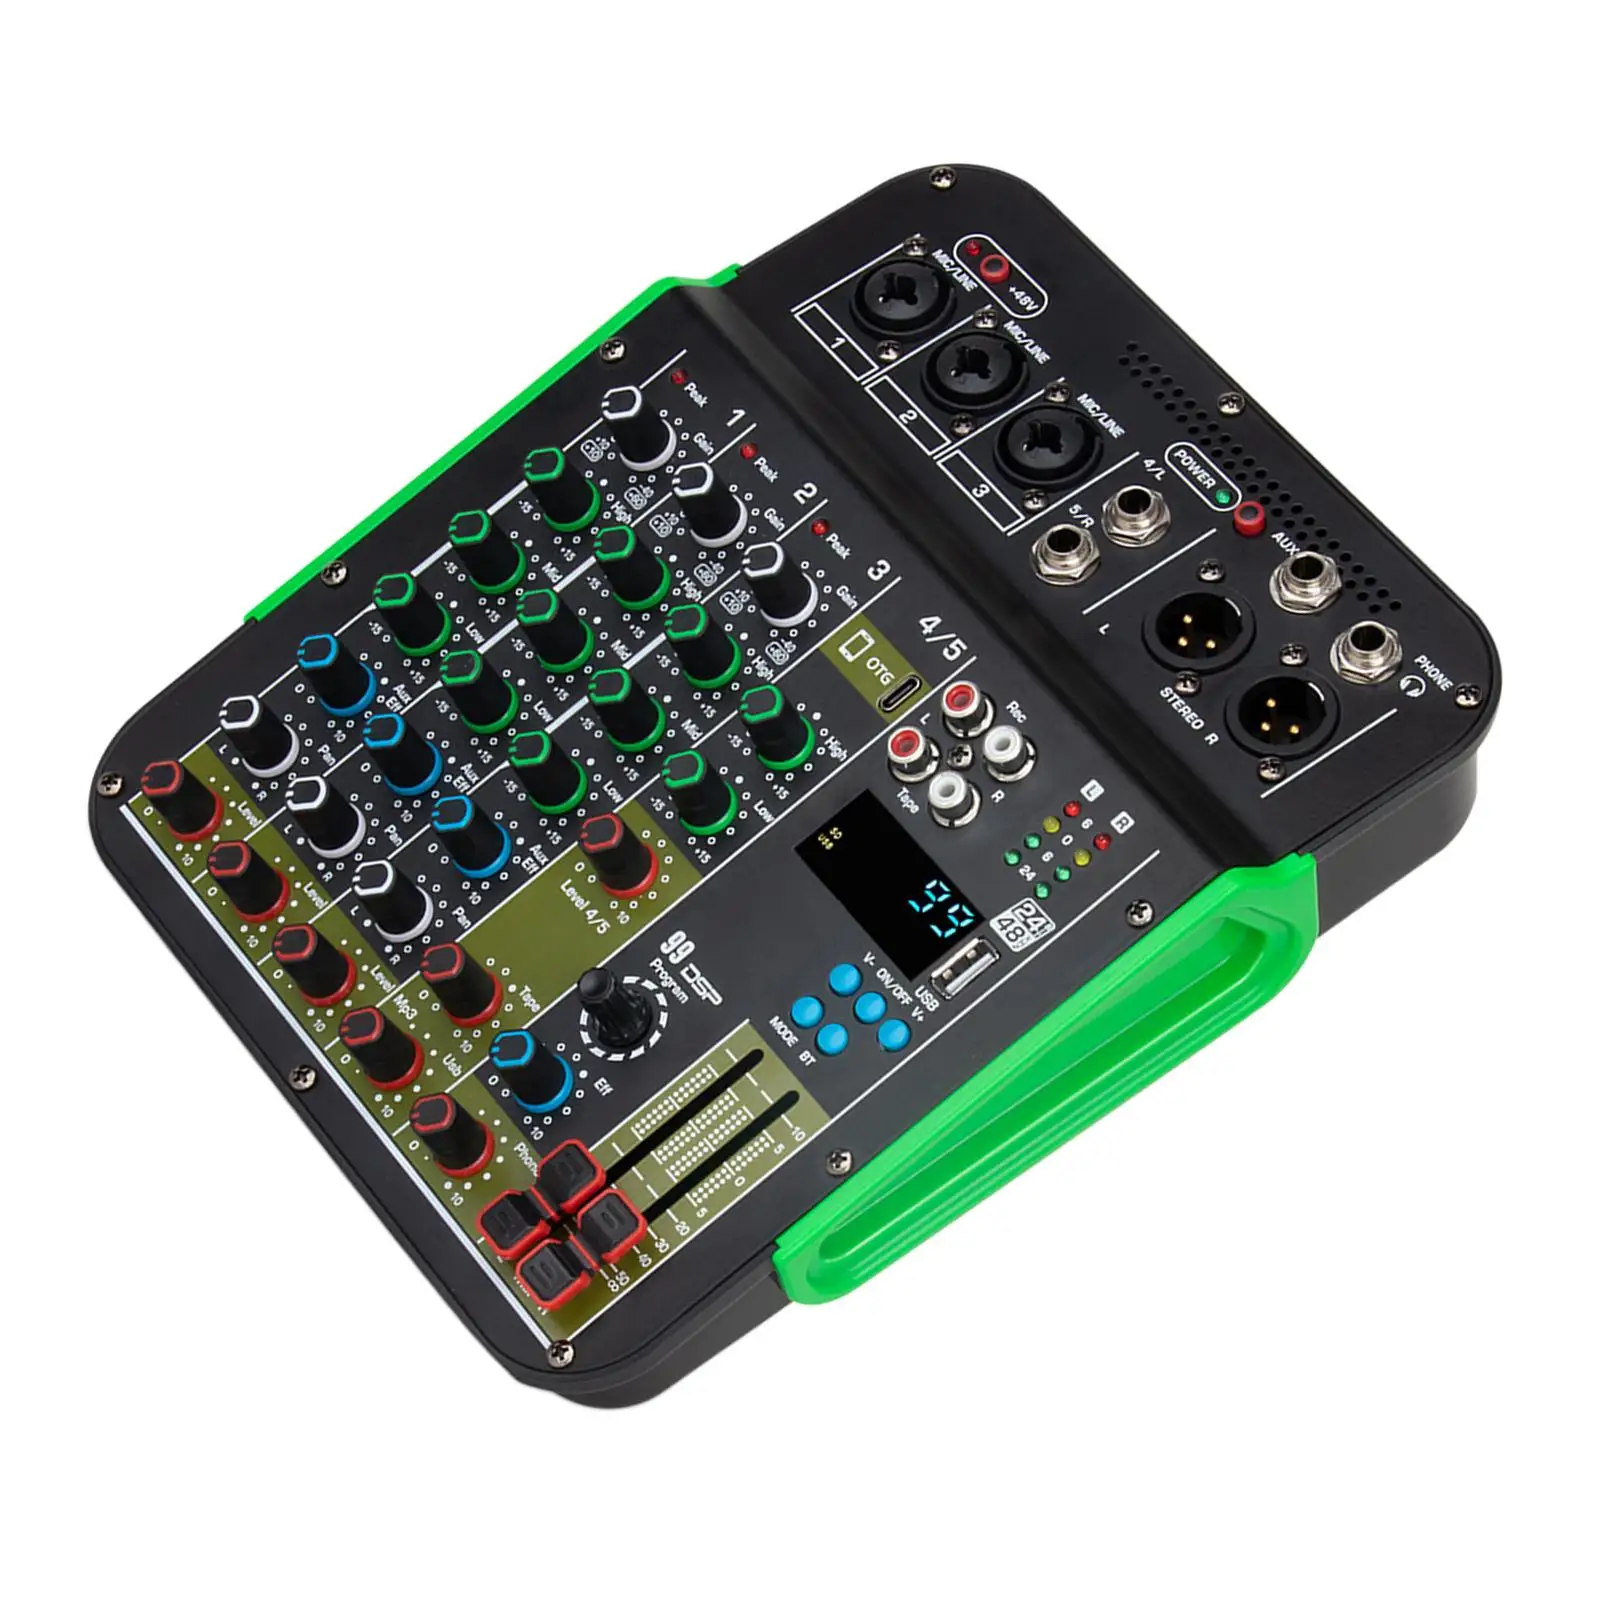 5 Channels Audio Mixer Digital Mixer Multifunctional Real Time Recording Portable for Family KTV Campus Speech Meeting 48V Power